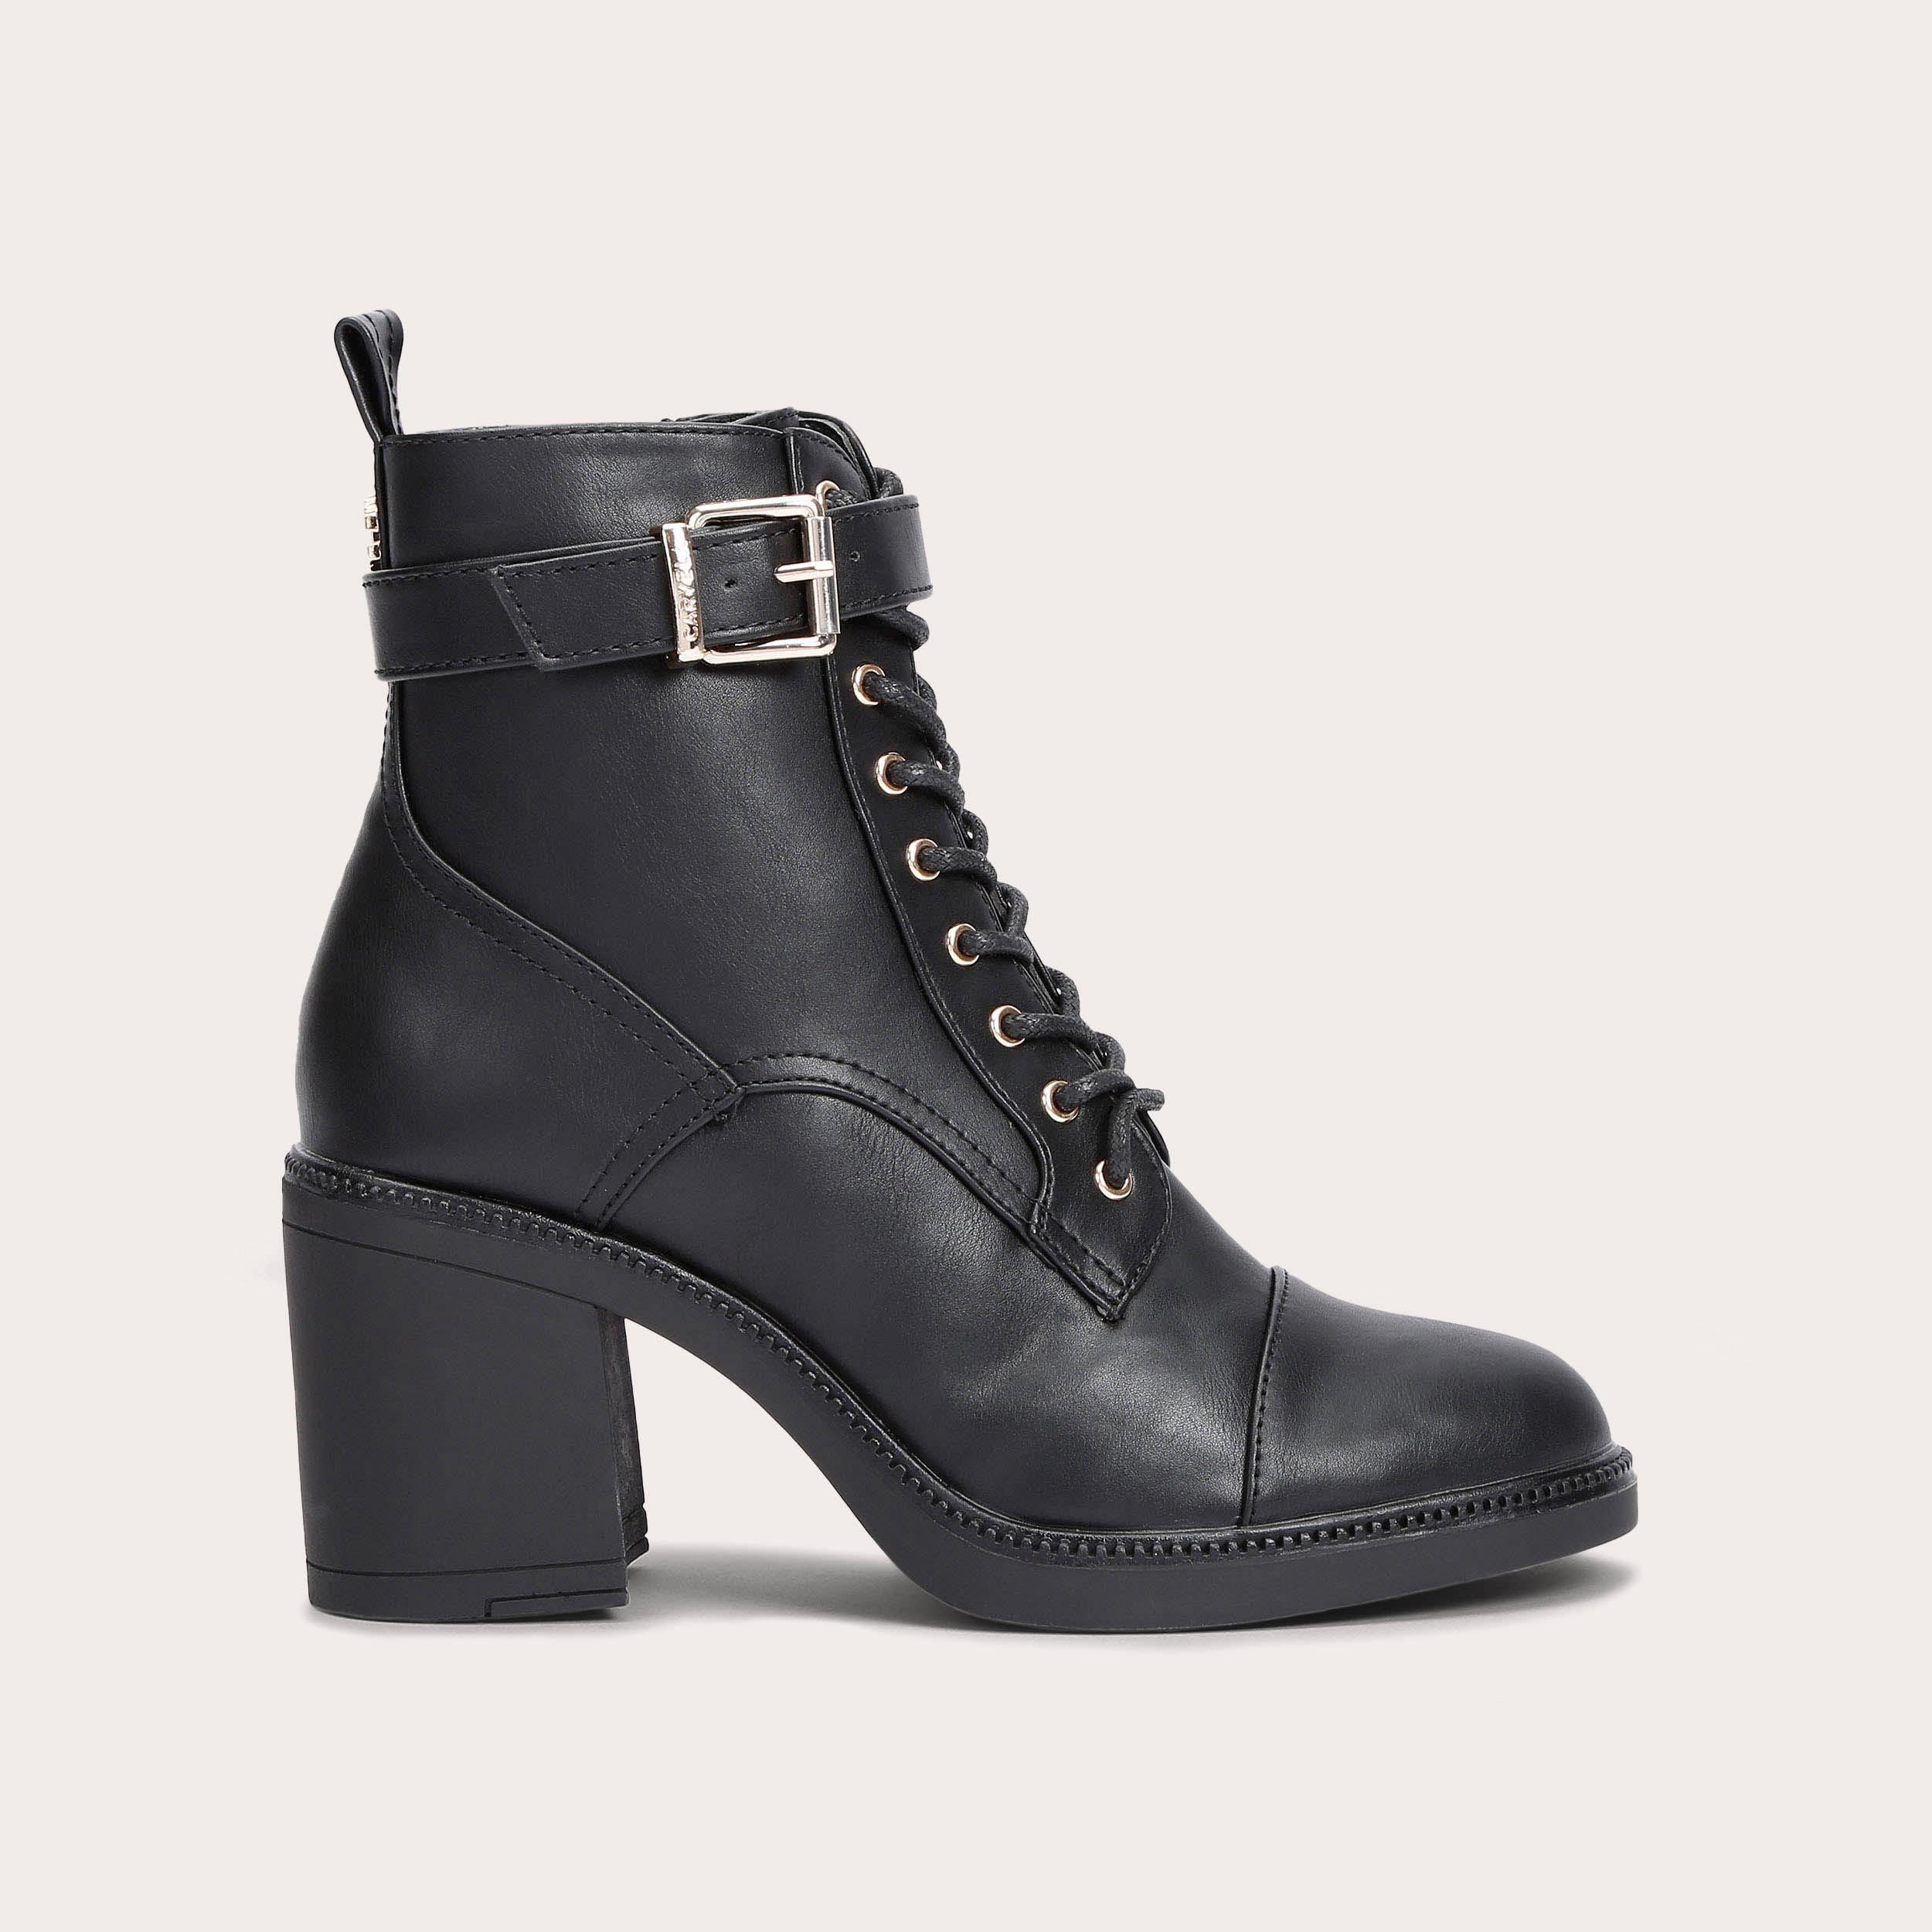 TEMPLE Black Heeled Ankle Boot by CARVELA